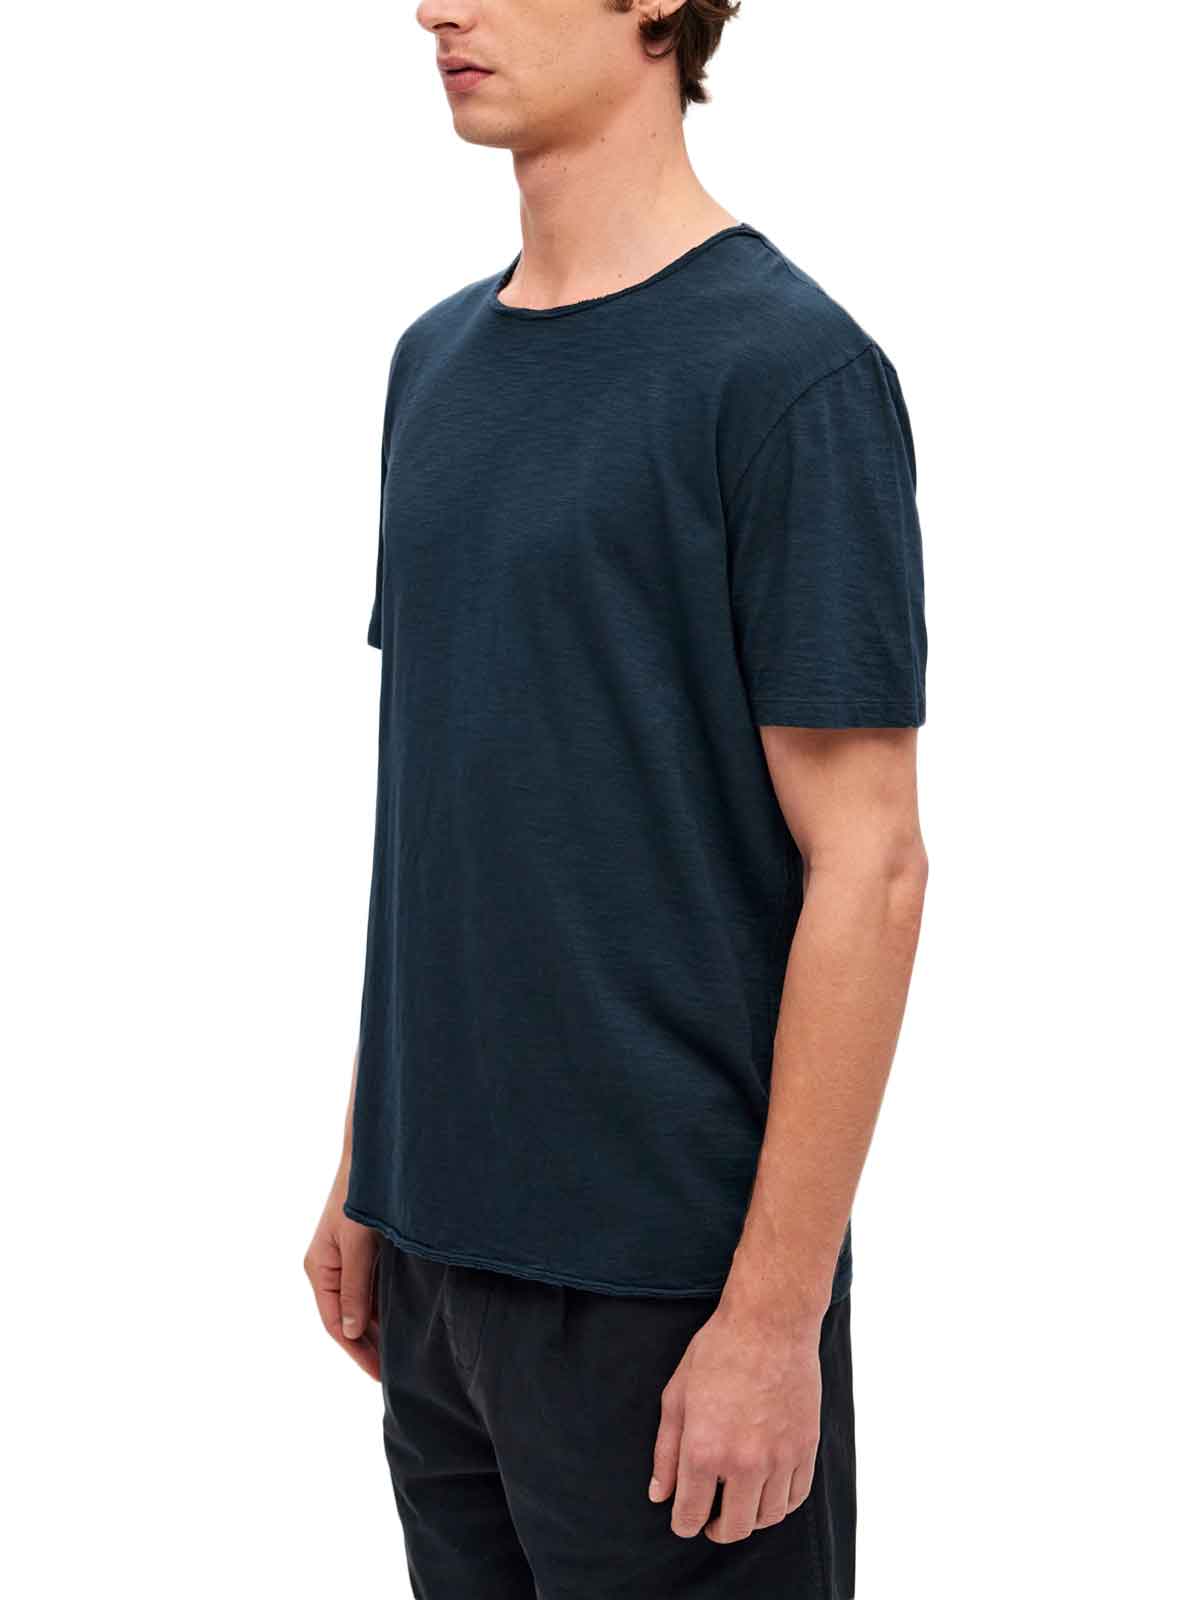   Dirty Laundry | Open Stitches Asymmetric Tee |  